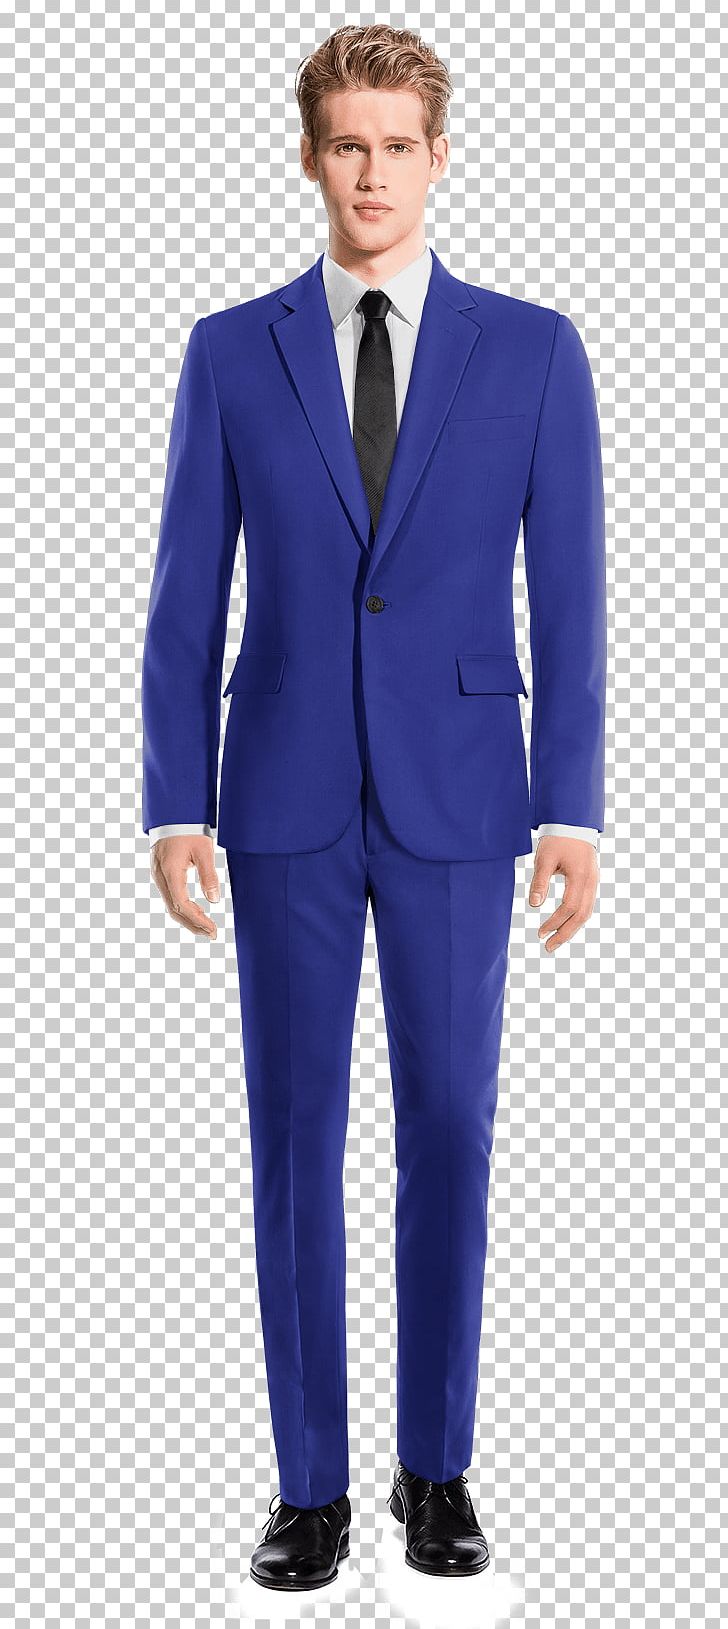 Suit Tuxedo Pants Clothing Double-breasted PNG, Clipart, Black Tie, Blauer Kamp, Blazer, Blue, Businessperson Free PNG Download